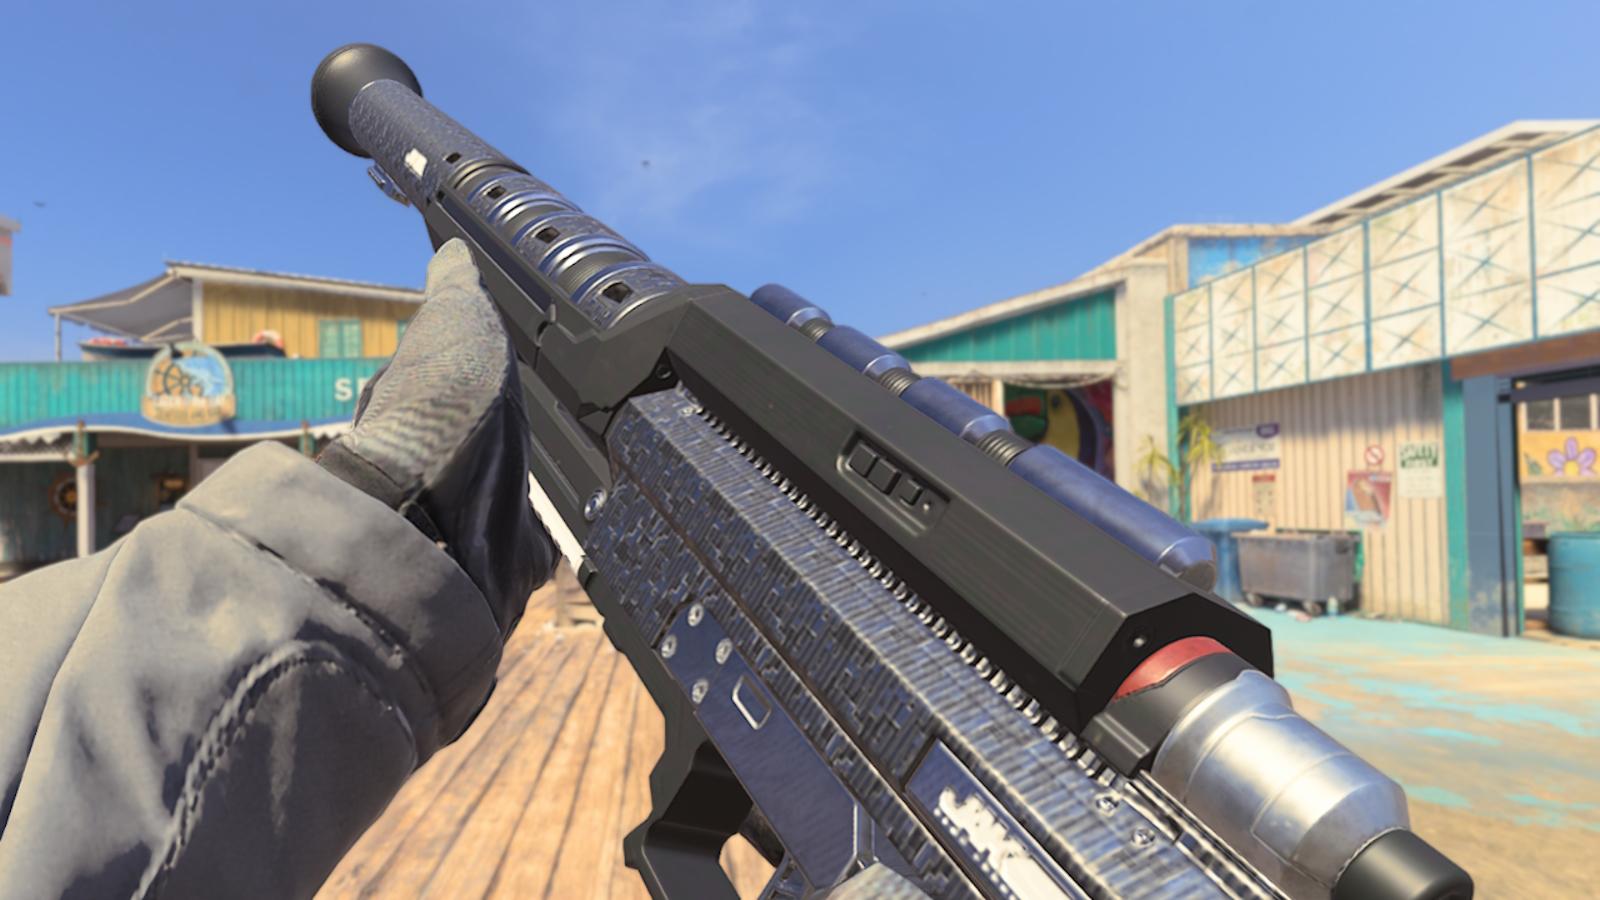 MORS with JAK Widemouth Barrel conversion kit equipped in MW3.